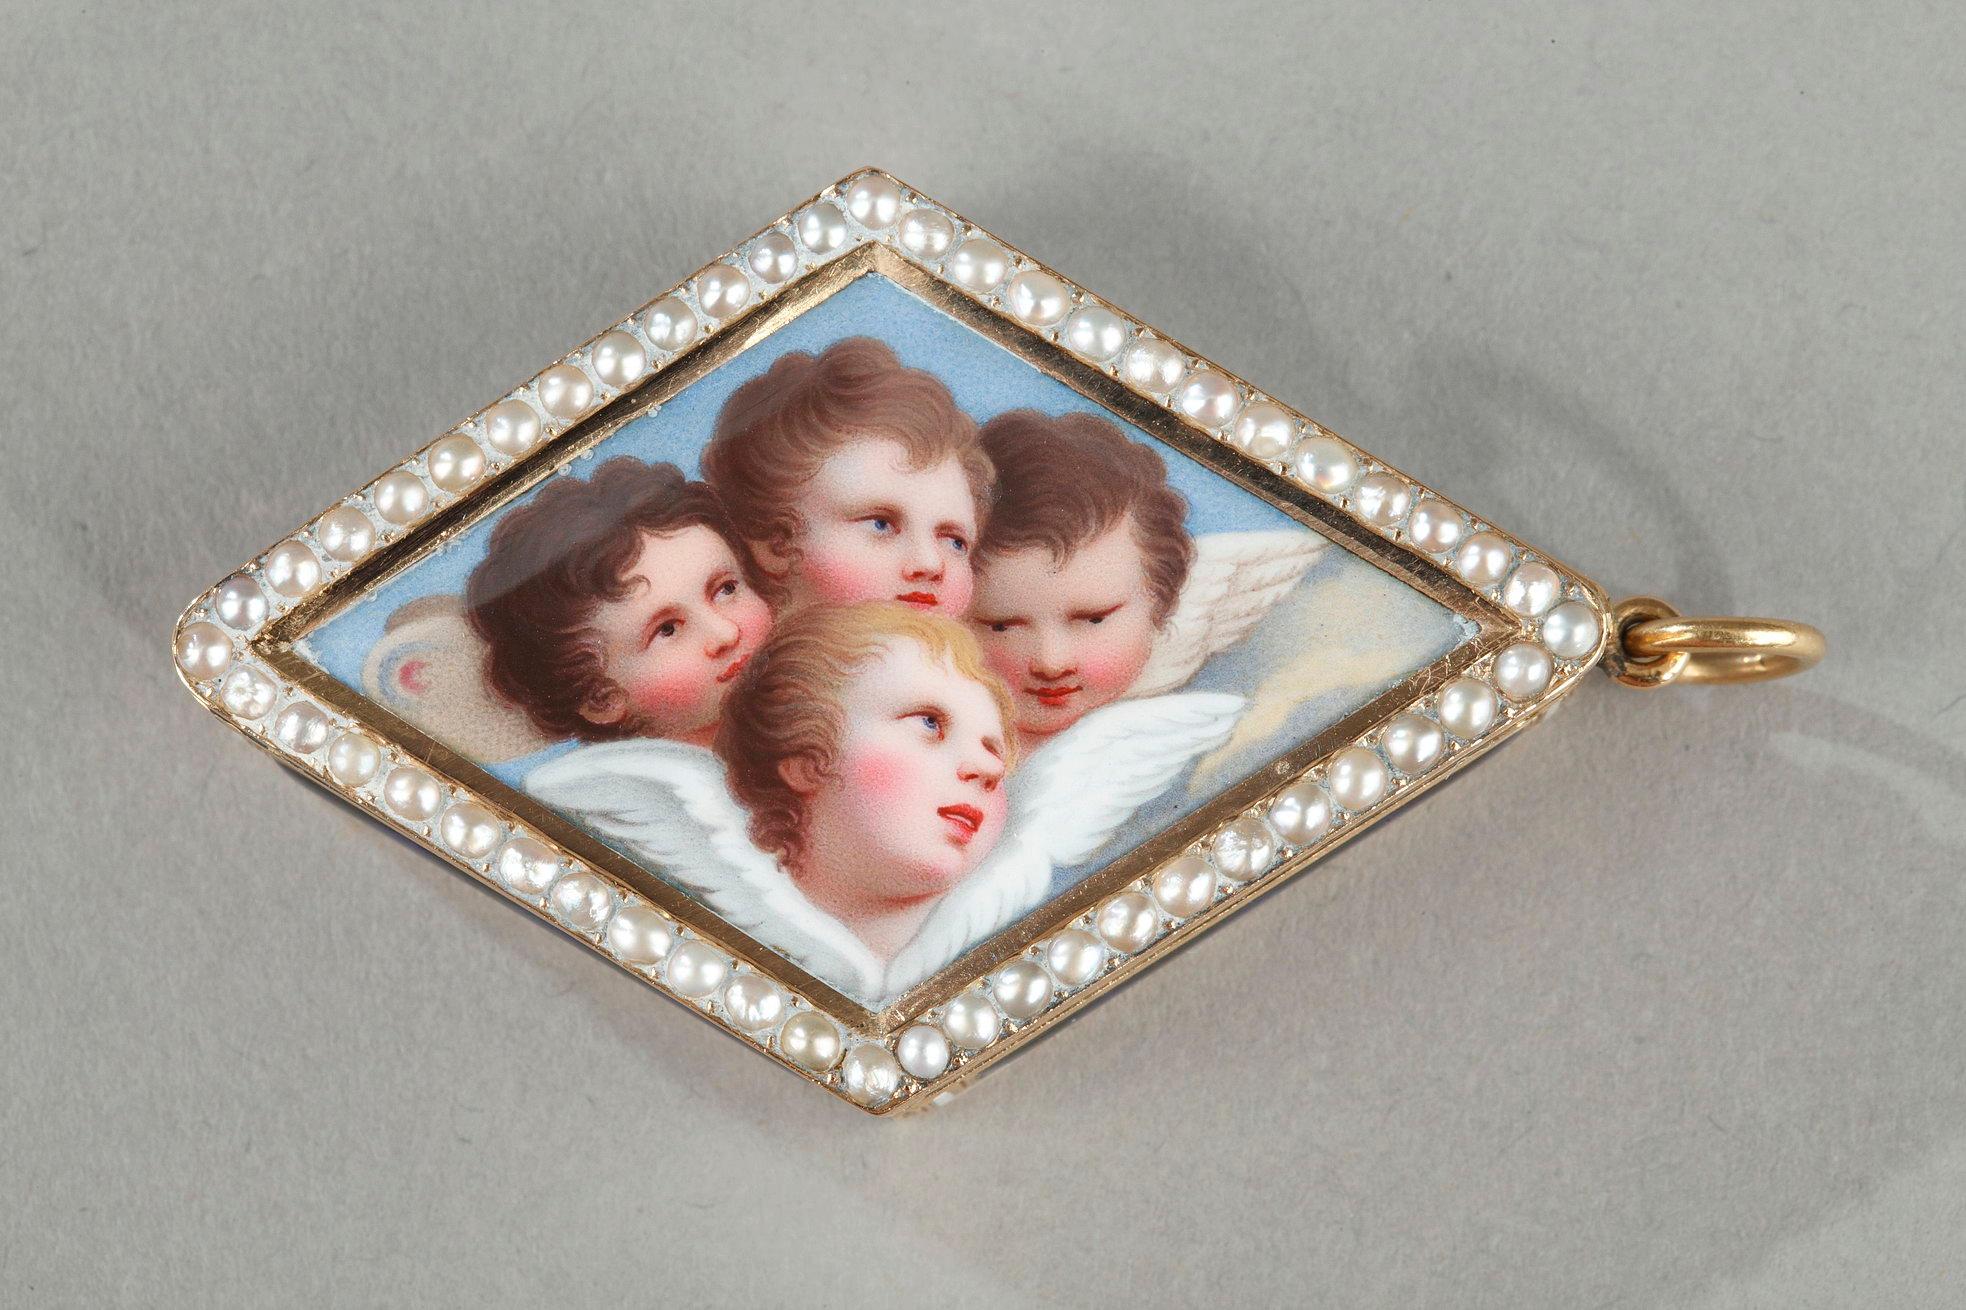 Diamond-shaped vinaigrette with enameled gold and bordered with pearls. The hinged lid is decorated with four winged cupid heads floating in the clouds. The sides of the lid are embellished with a taille d'épargne frieze with alternating flowers and